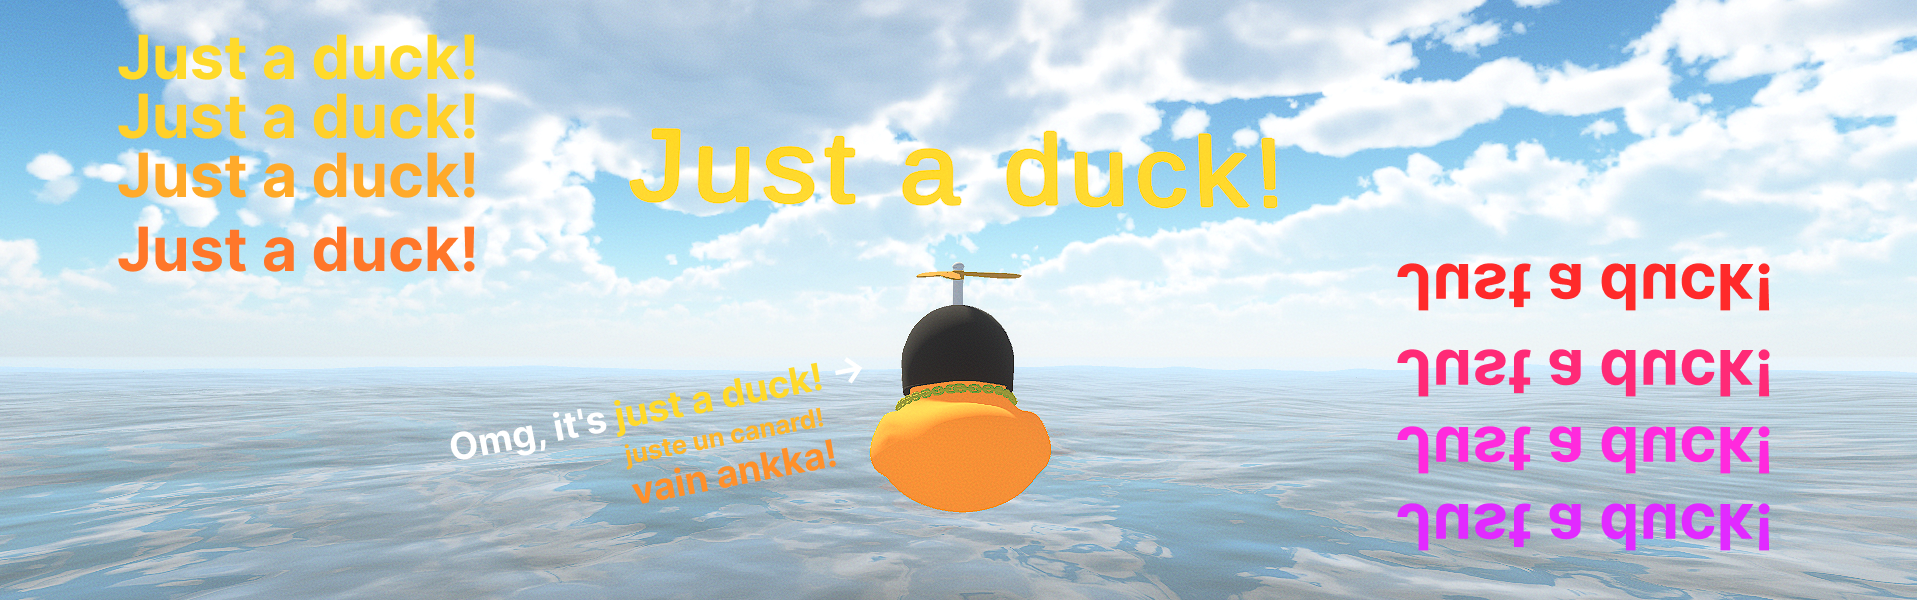 Just a duck!